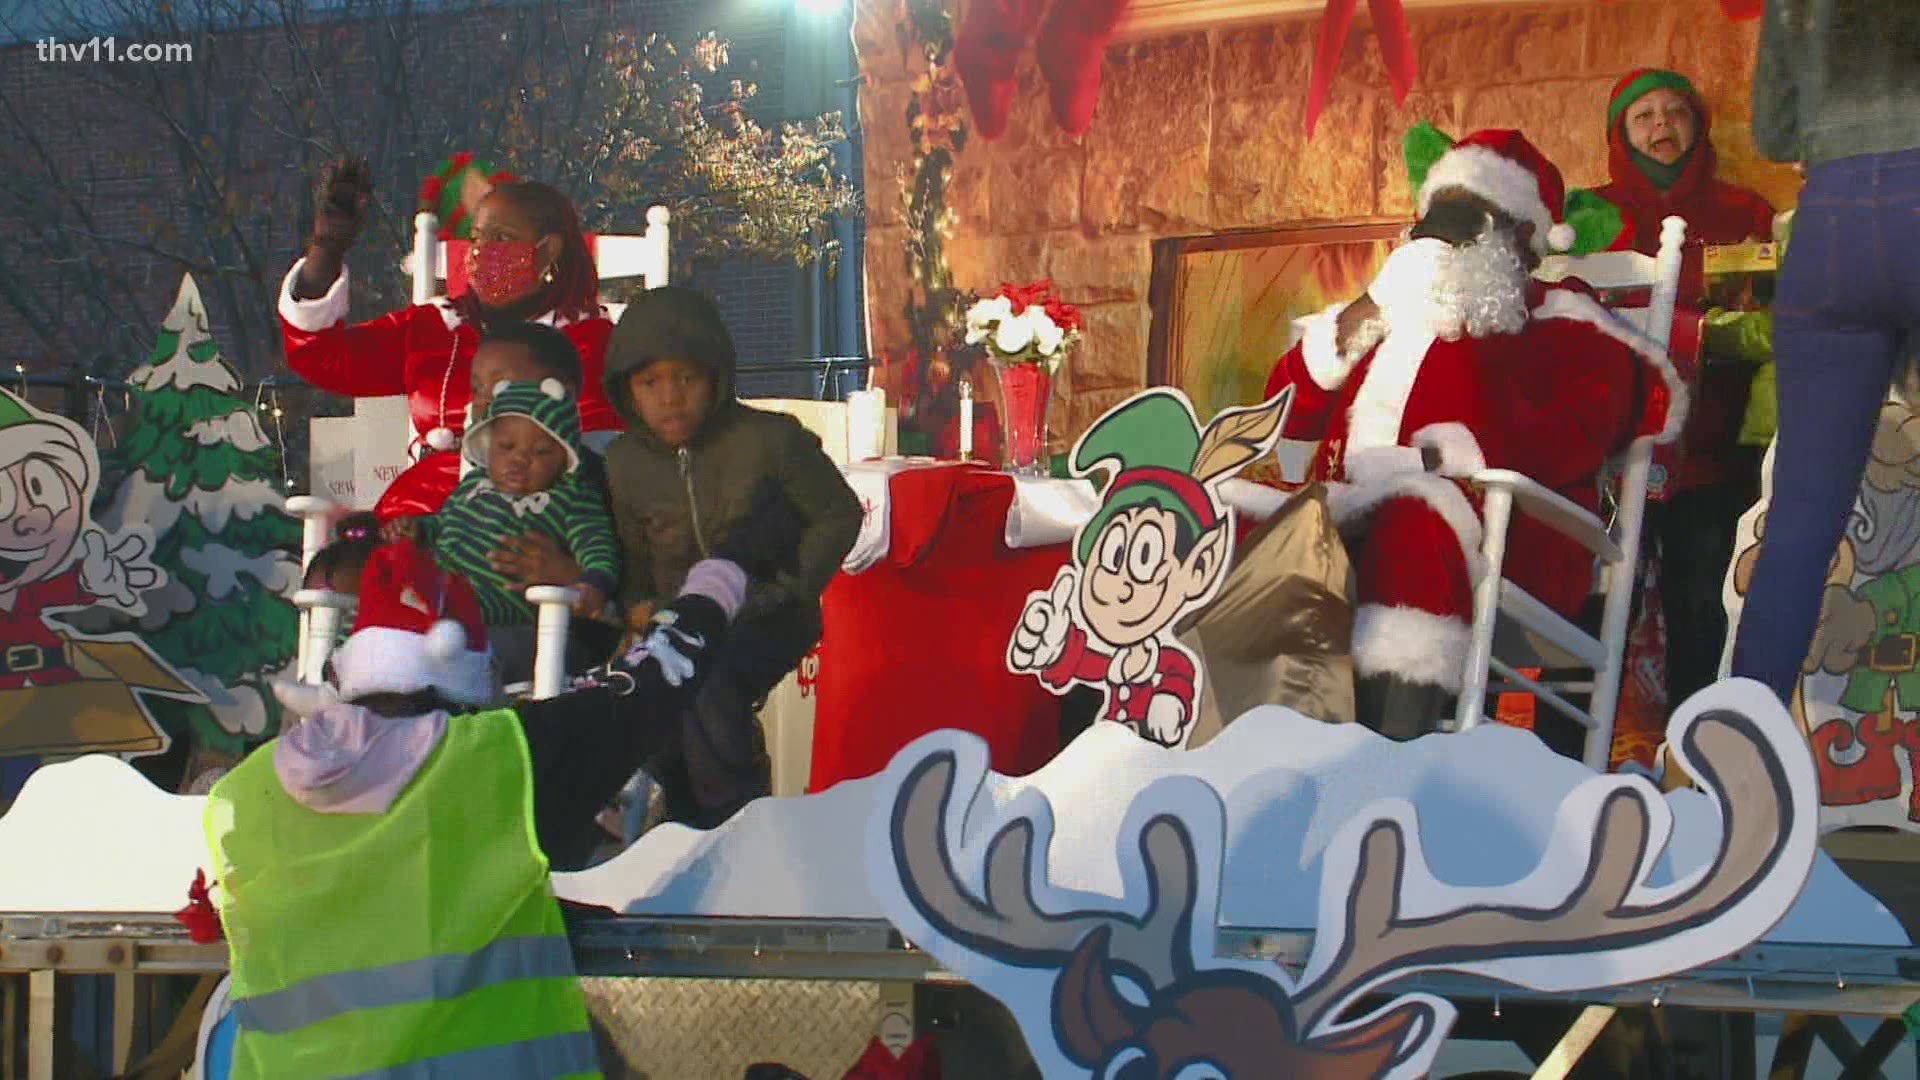 The Arkansas Martin Luther King Jr. Commission brought back the historic 'Ninth Street District' Christmas celebration.